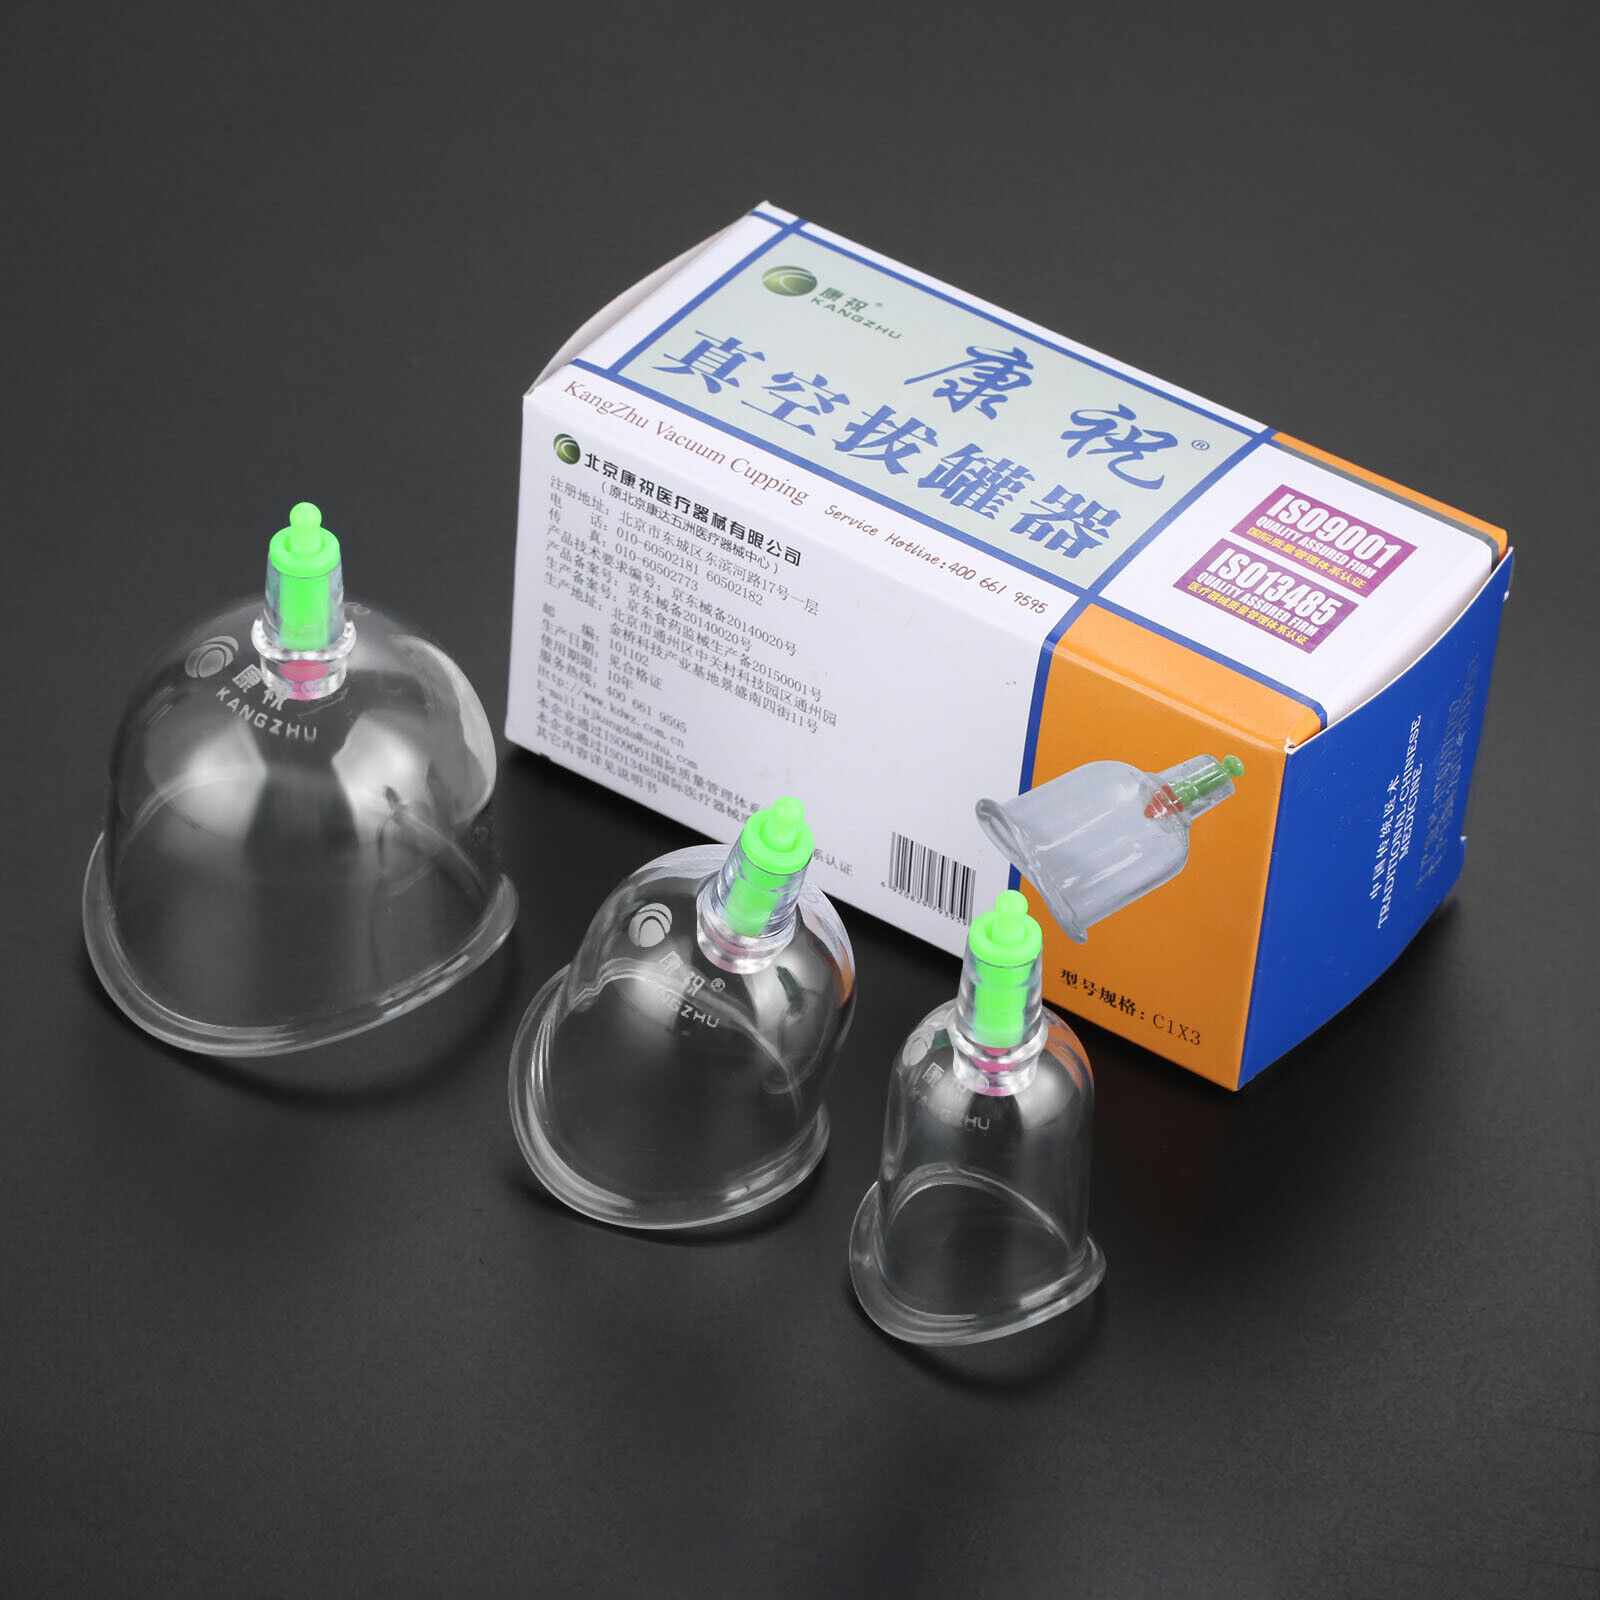 Curved Vacuum Cups Cupping Physical Therapy for Joints Arthritis Massage Set Unbranded/Generic Does Not Apply